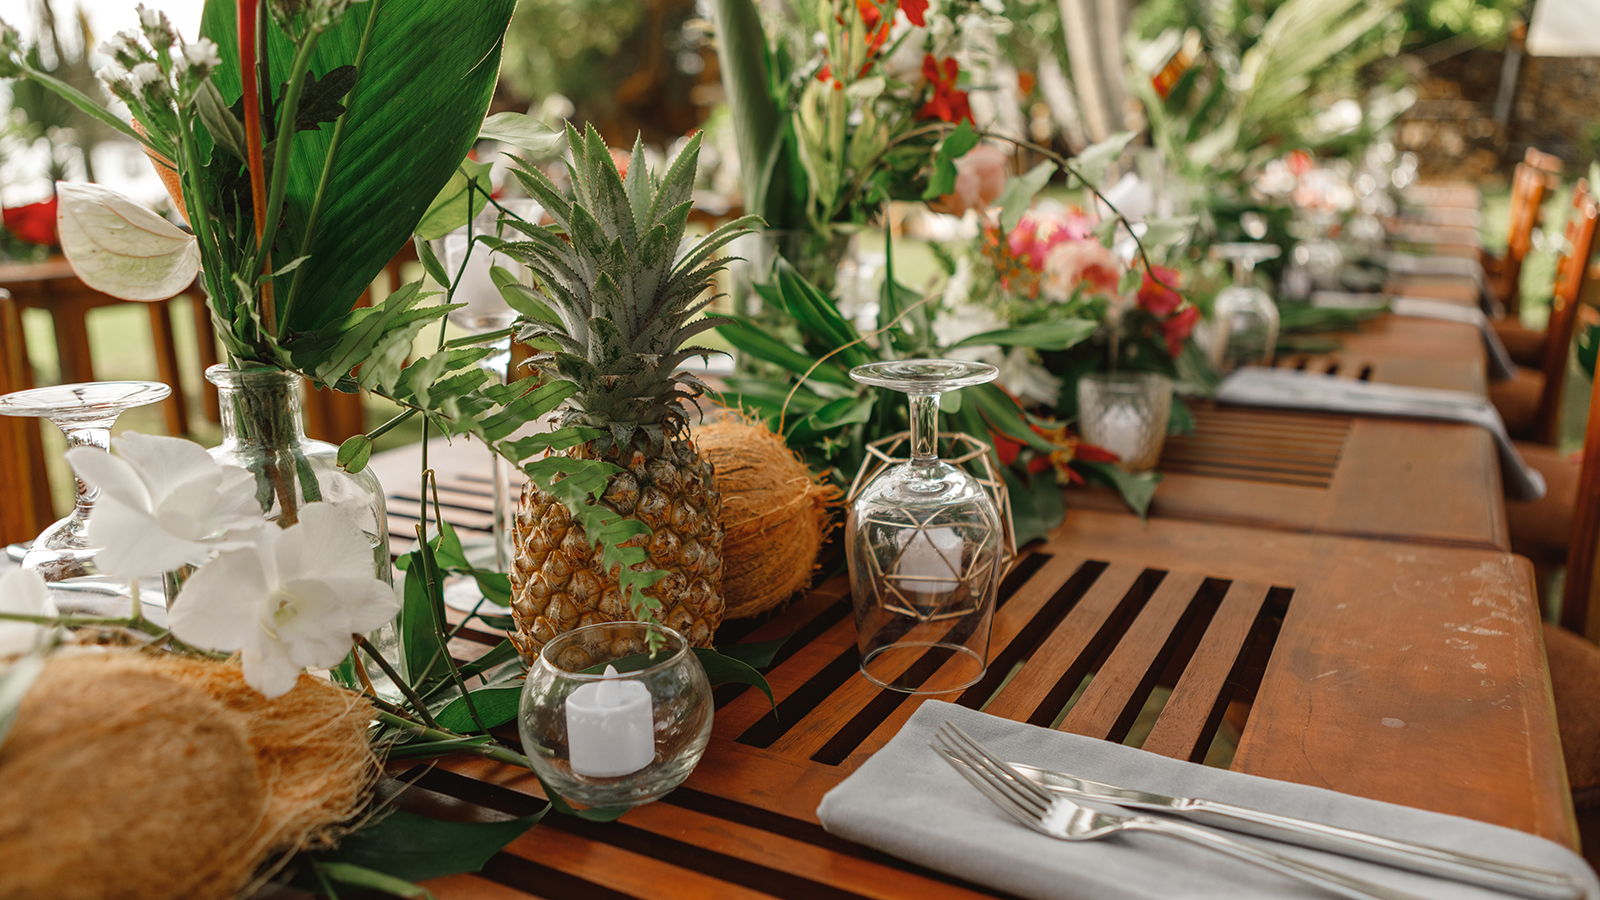 Served tables for wedding banquet with plates placed on palm leaves in restaurant. Served table for a wedding dinner in boho chic style. Decor from fresh flowers of greenery, pineapples and coconuts.